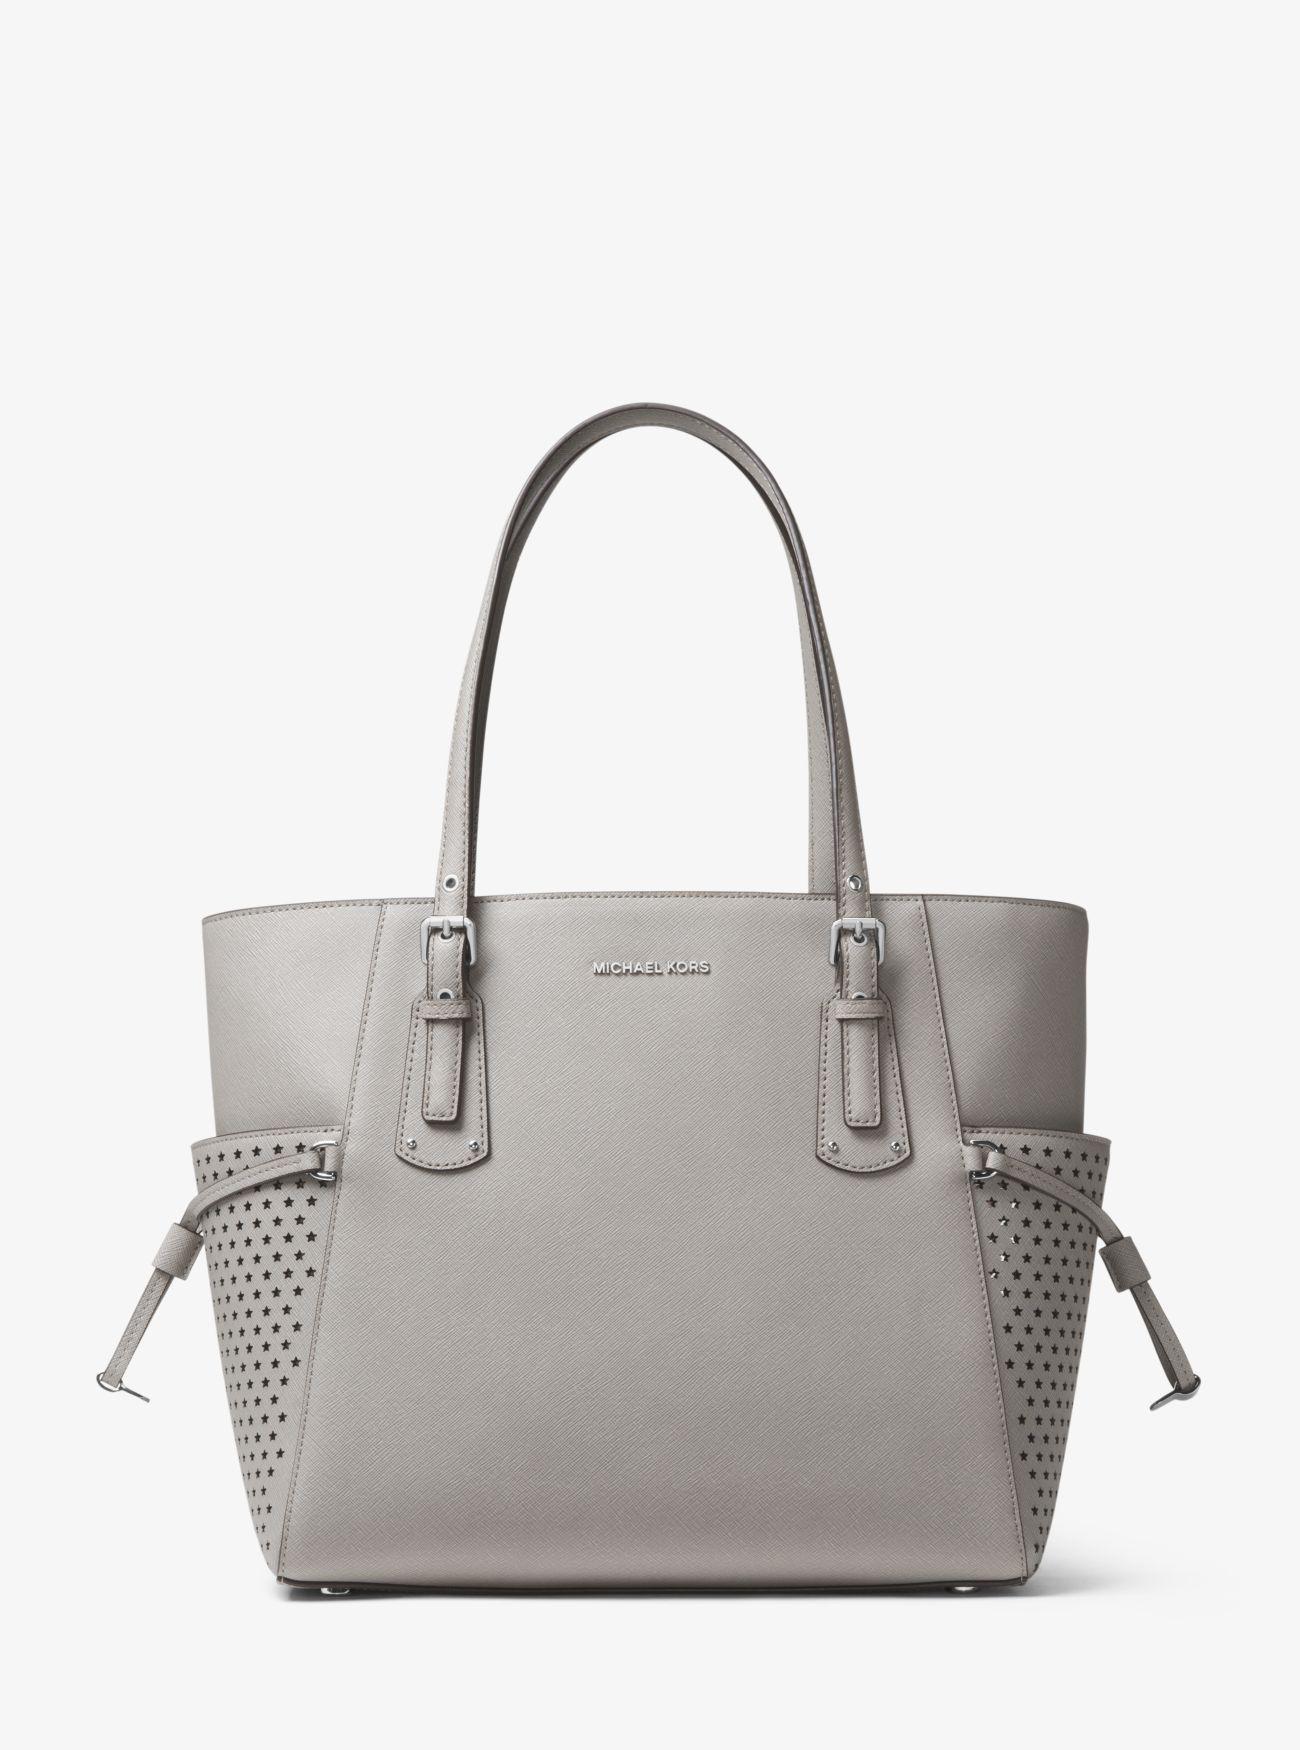 Lyst - Michael Kors Voyager Small Saffiano Leather Tote in Gray